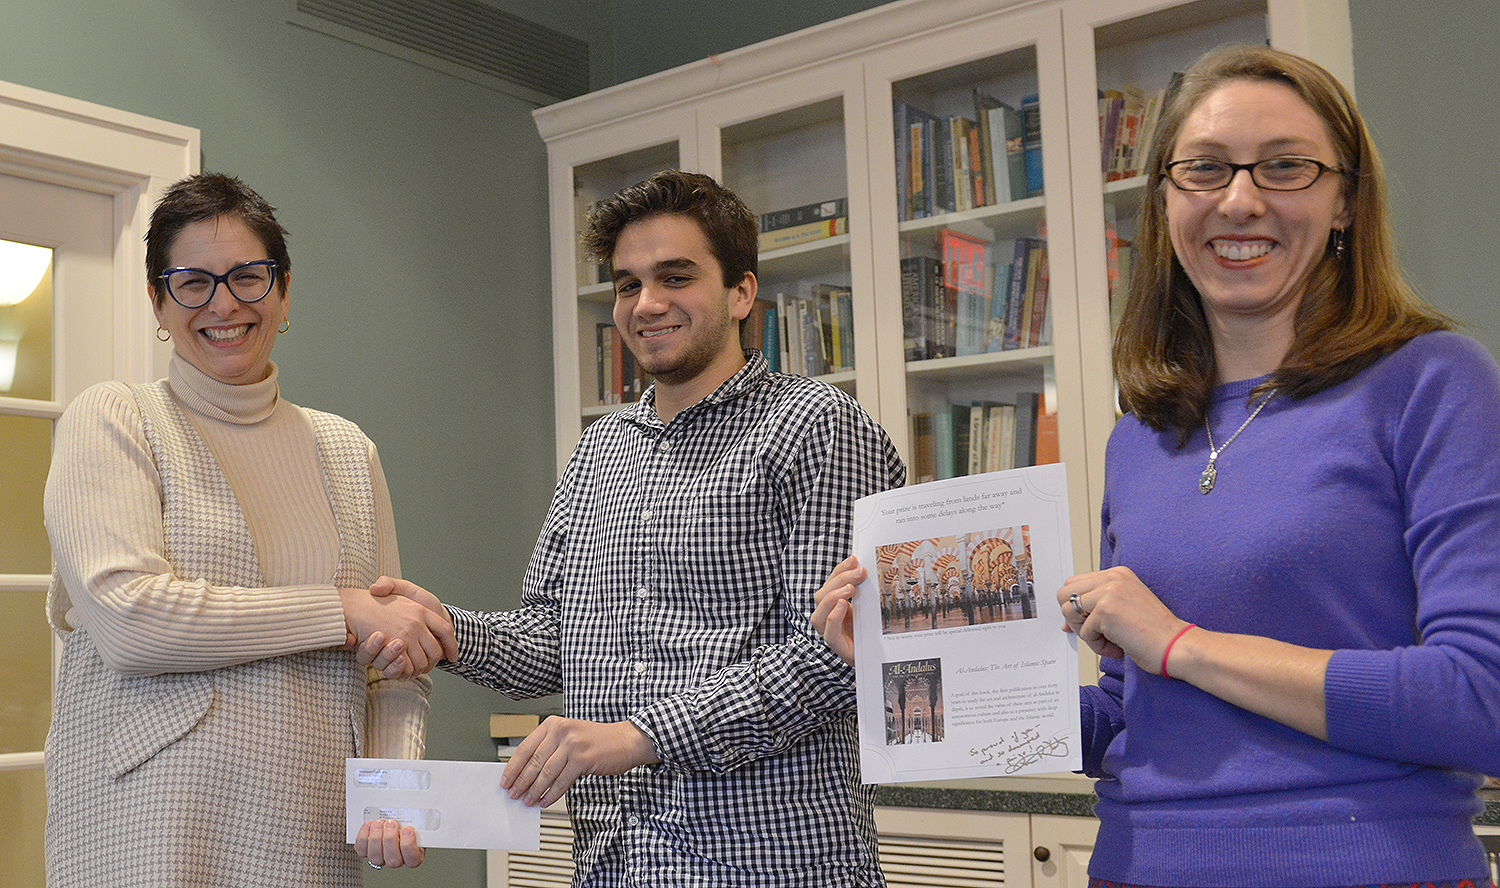 Daniel Atik '20 took second place in a tie with his essay “Converted Bells: An Exploration of Religious Power Dynamics," written in his College of Letters 120 course, Muslims, Jews, and Christians, Getting Along in the Medieval World. The class was taught by Melissa Katz, visiting assistant professor of romance languages and literatures.